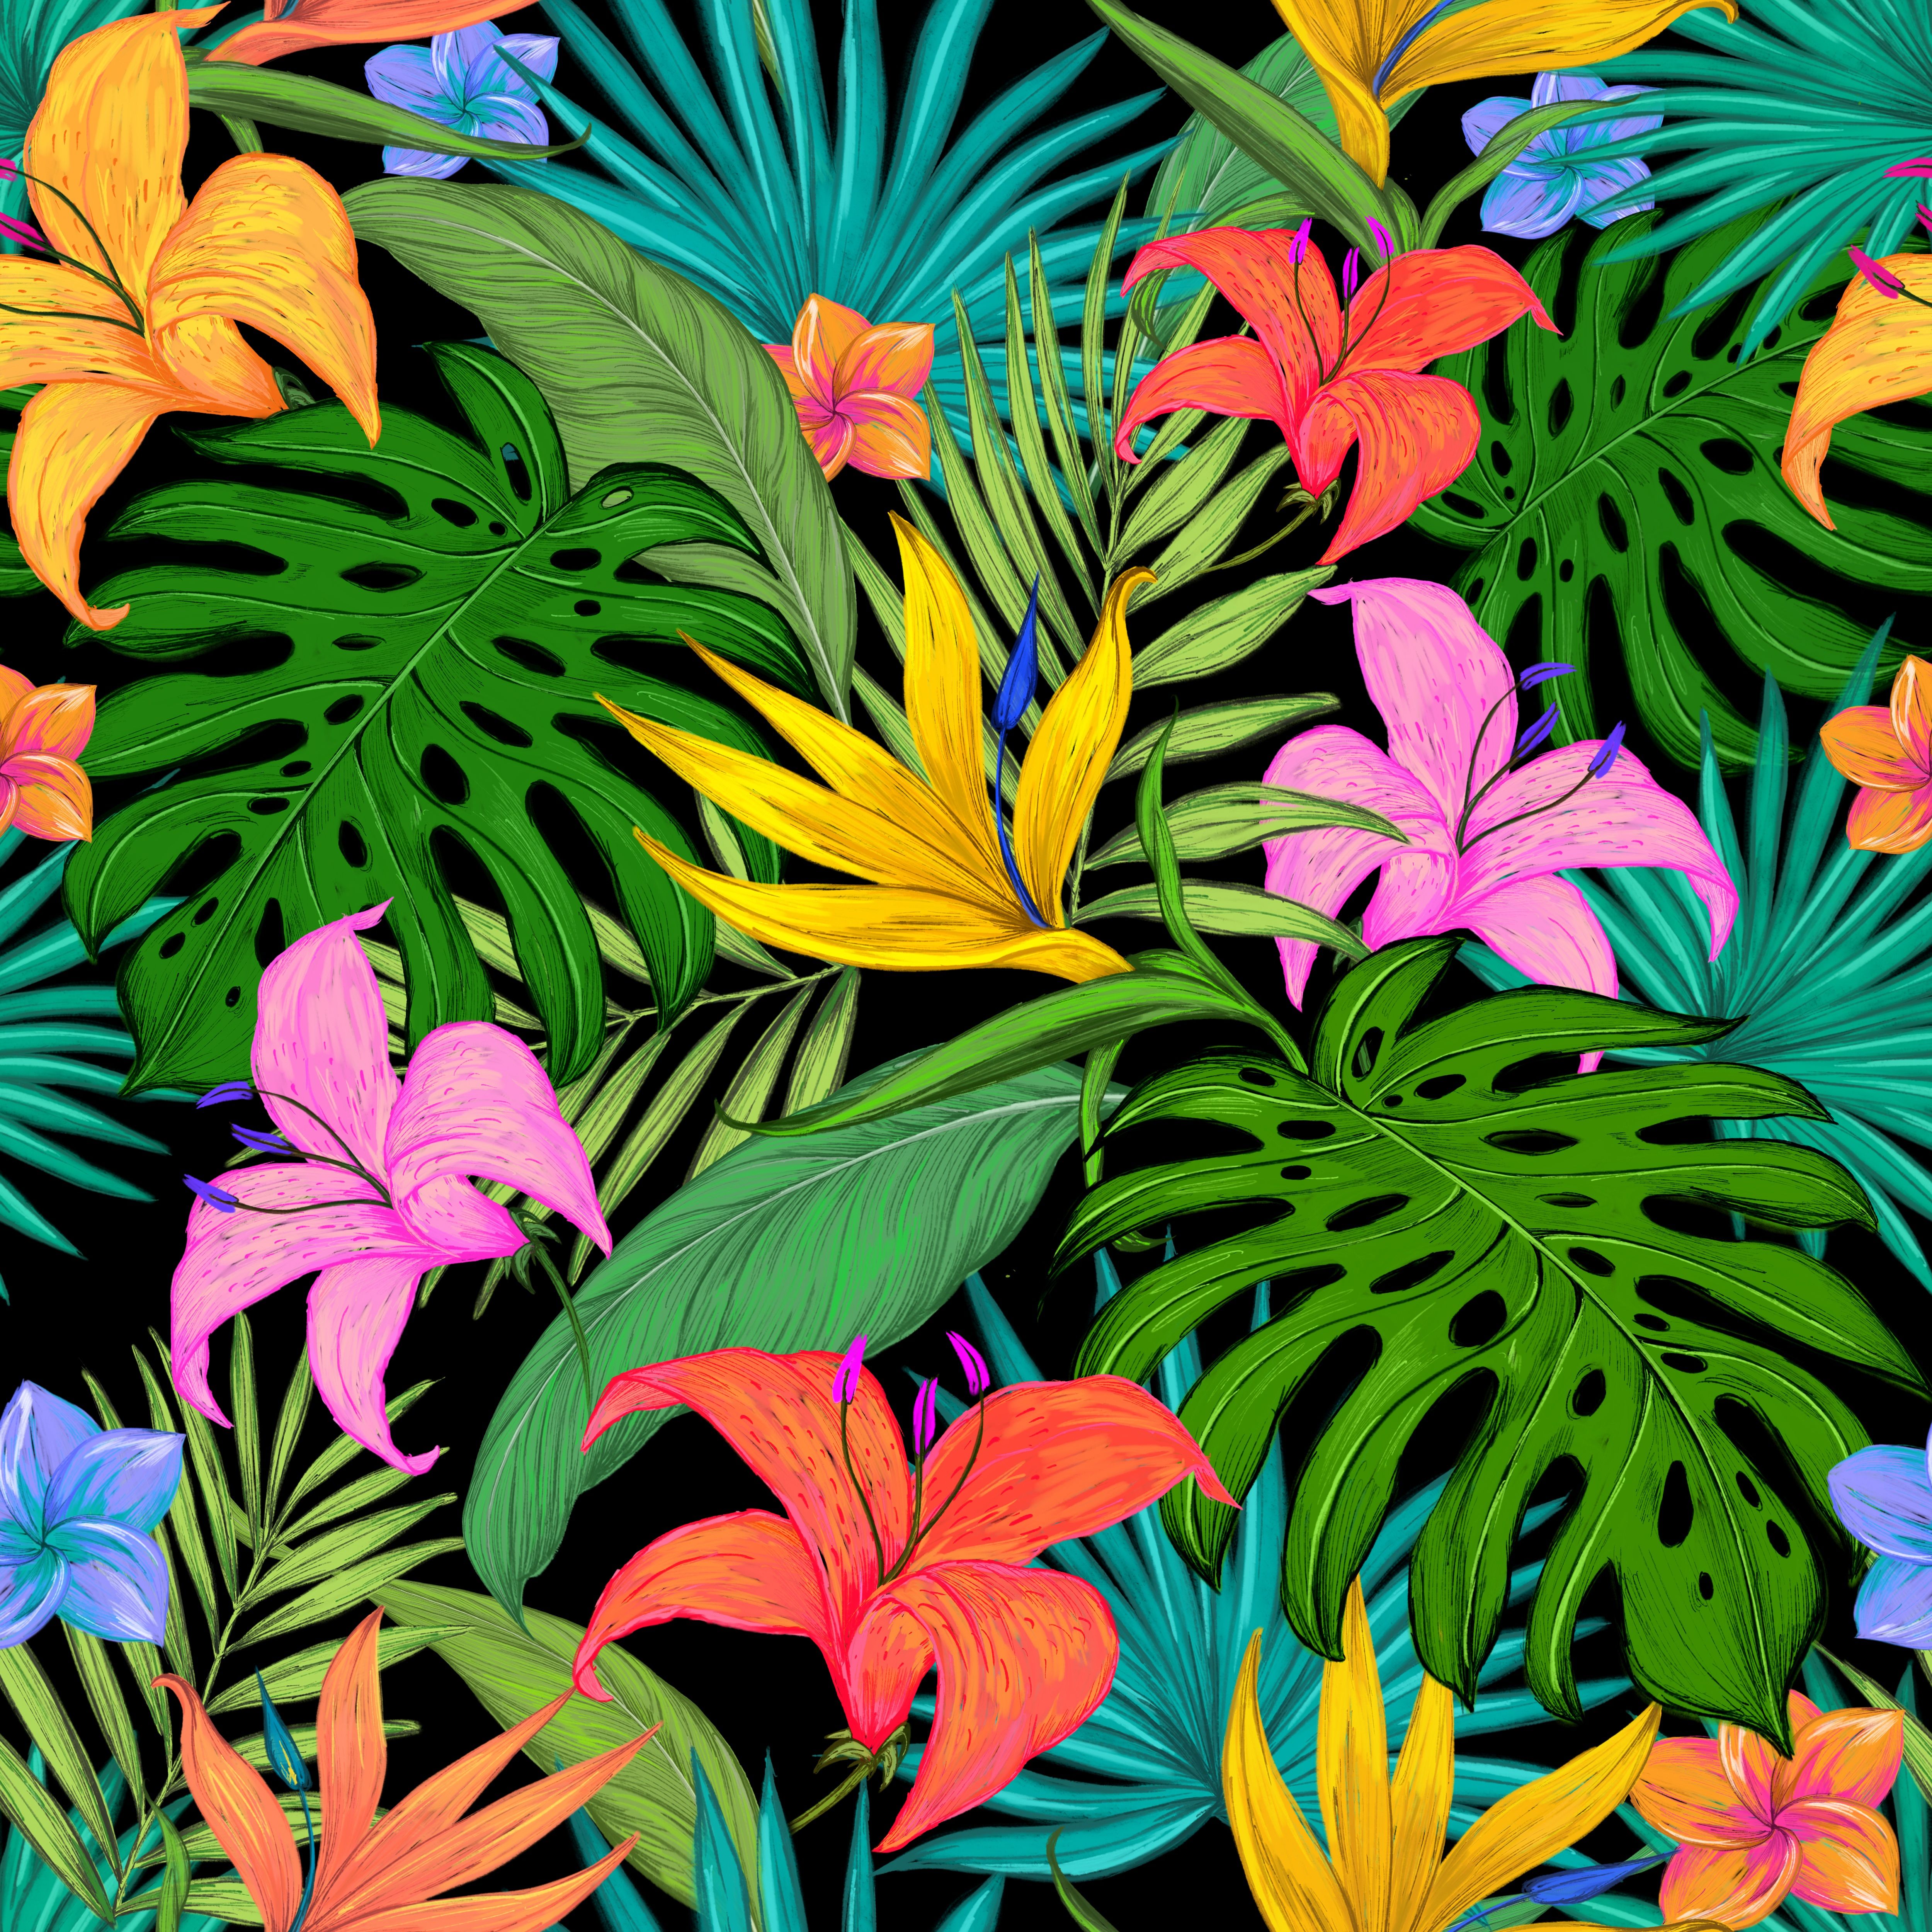 Download wallpaper 5000x5000 pattern, tropical, flowers, leaves, lilies, palm leaves, colored HD background